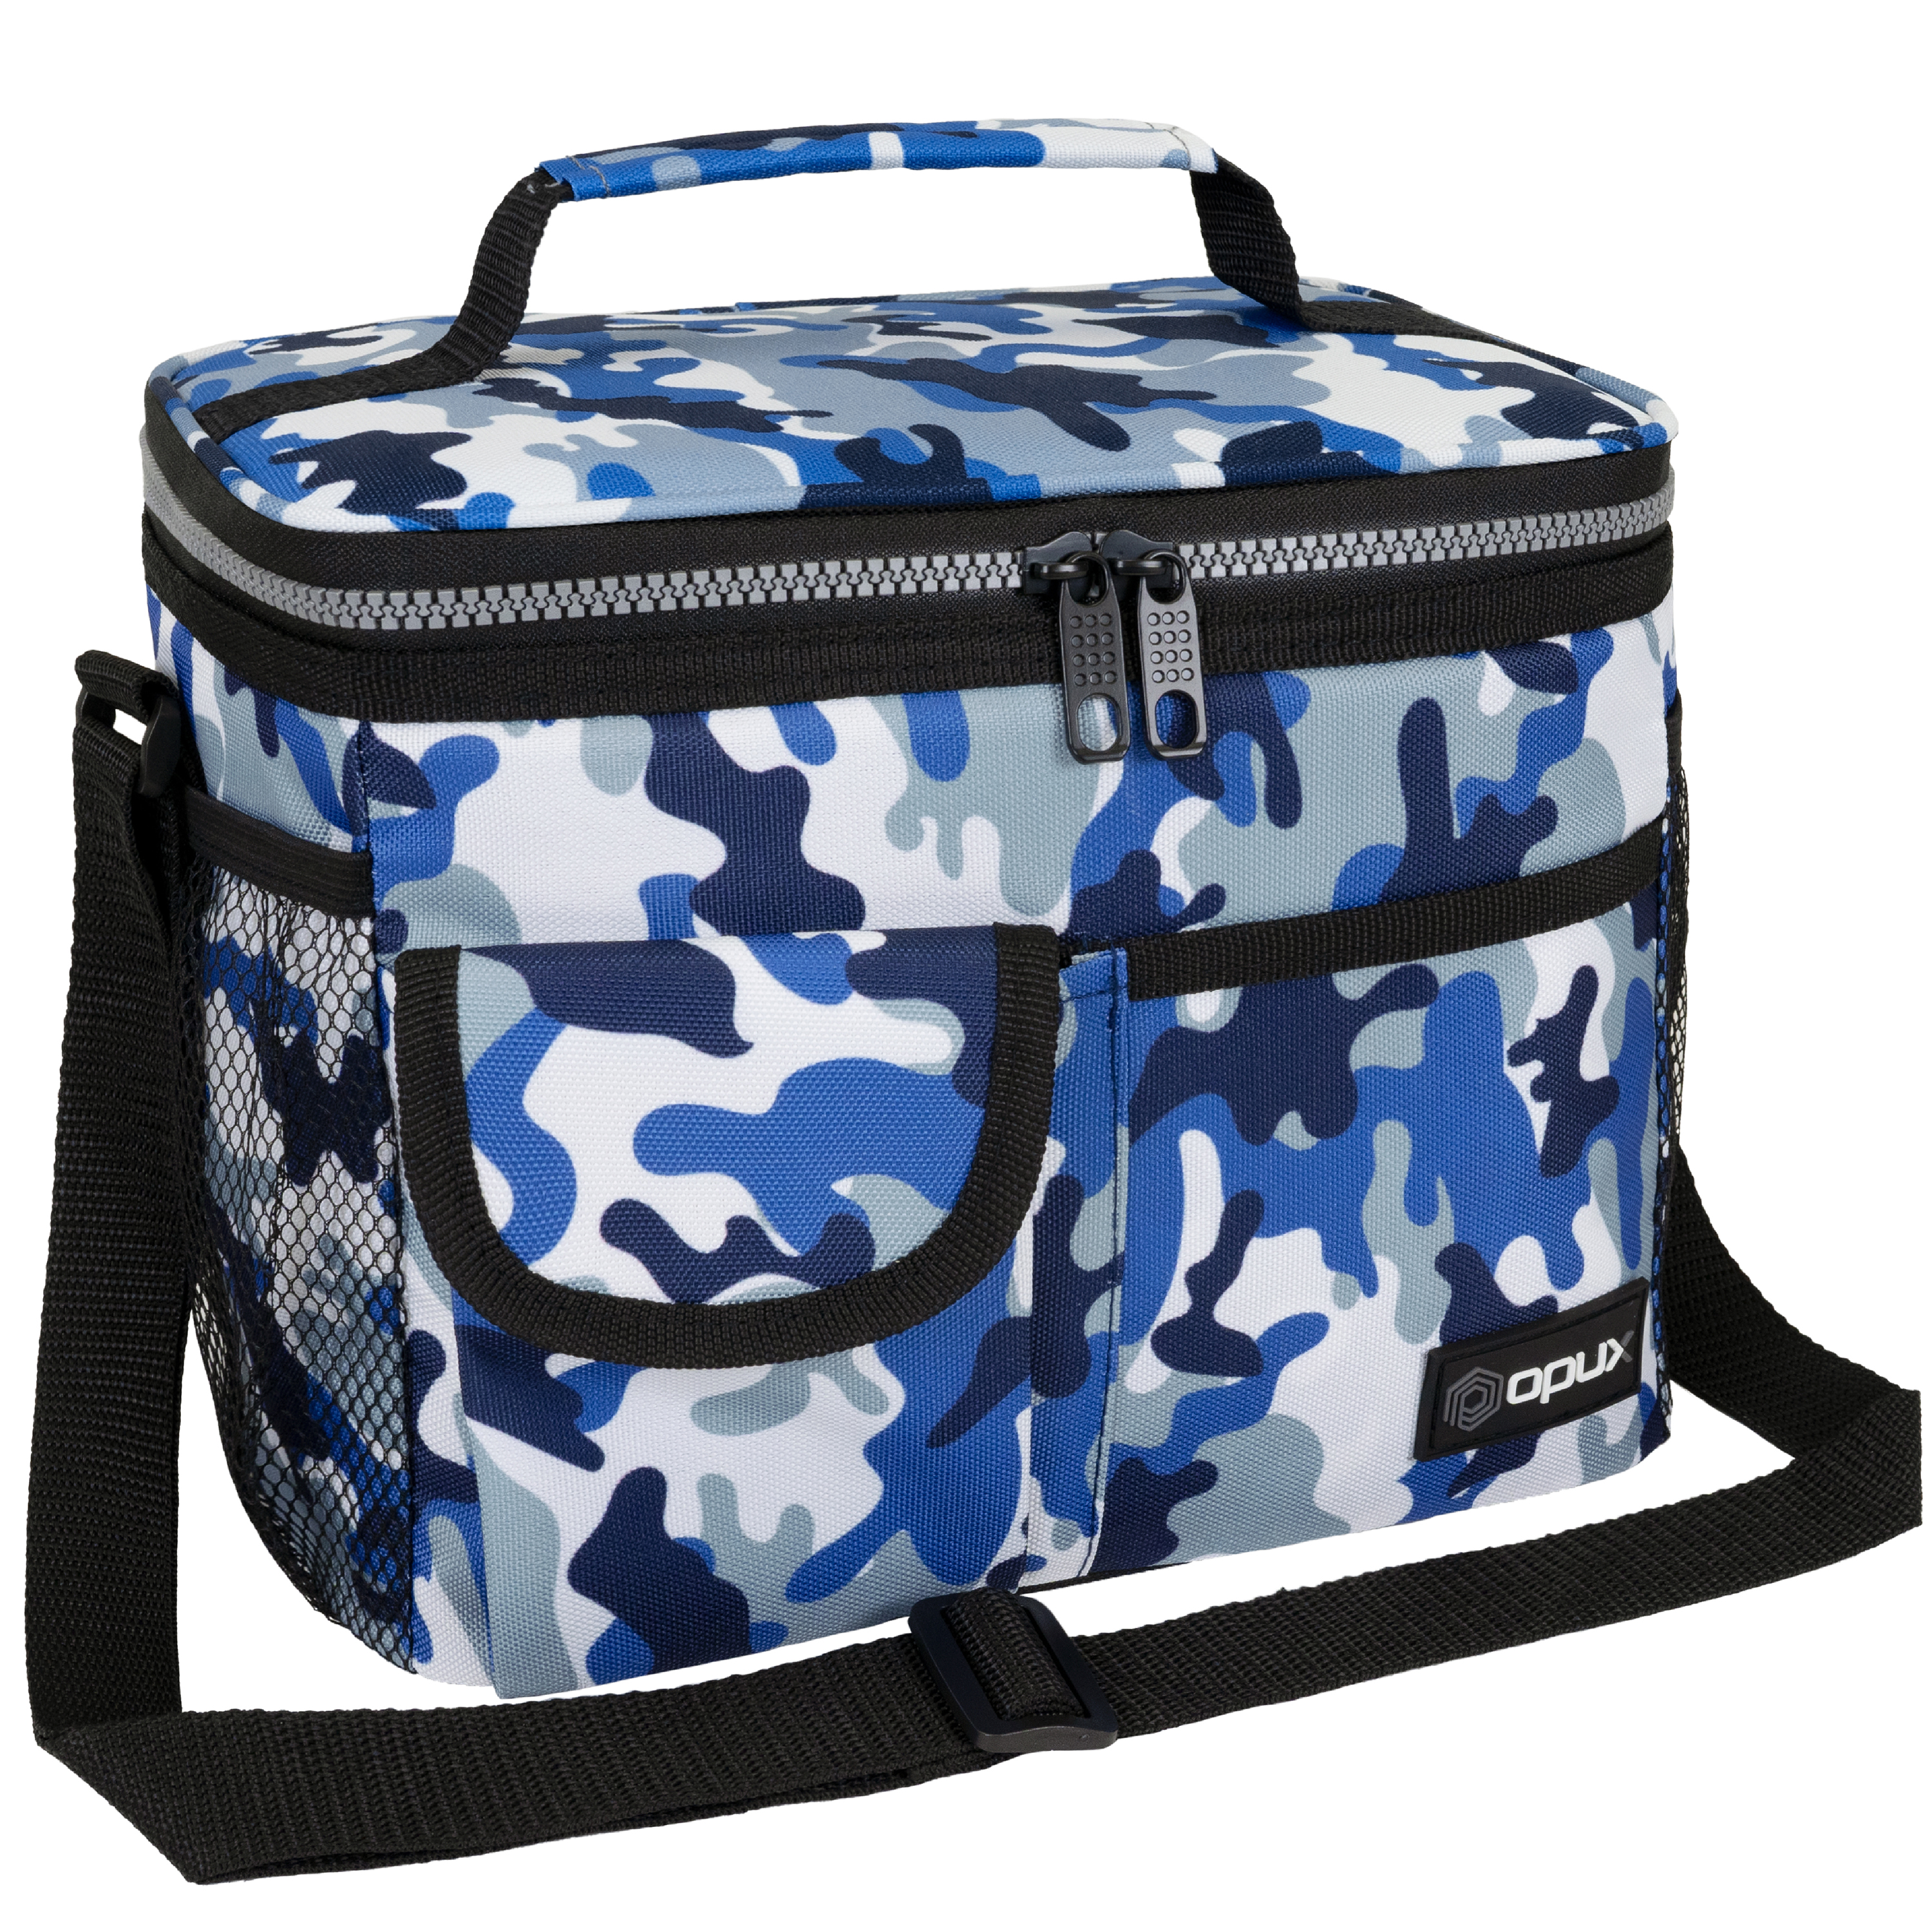 OPUX Lunch Bag Insulated Lunch Box for Women, Men, Kids - image 1 of 8